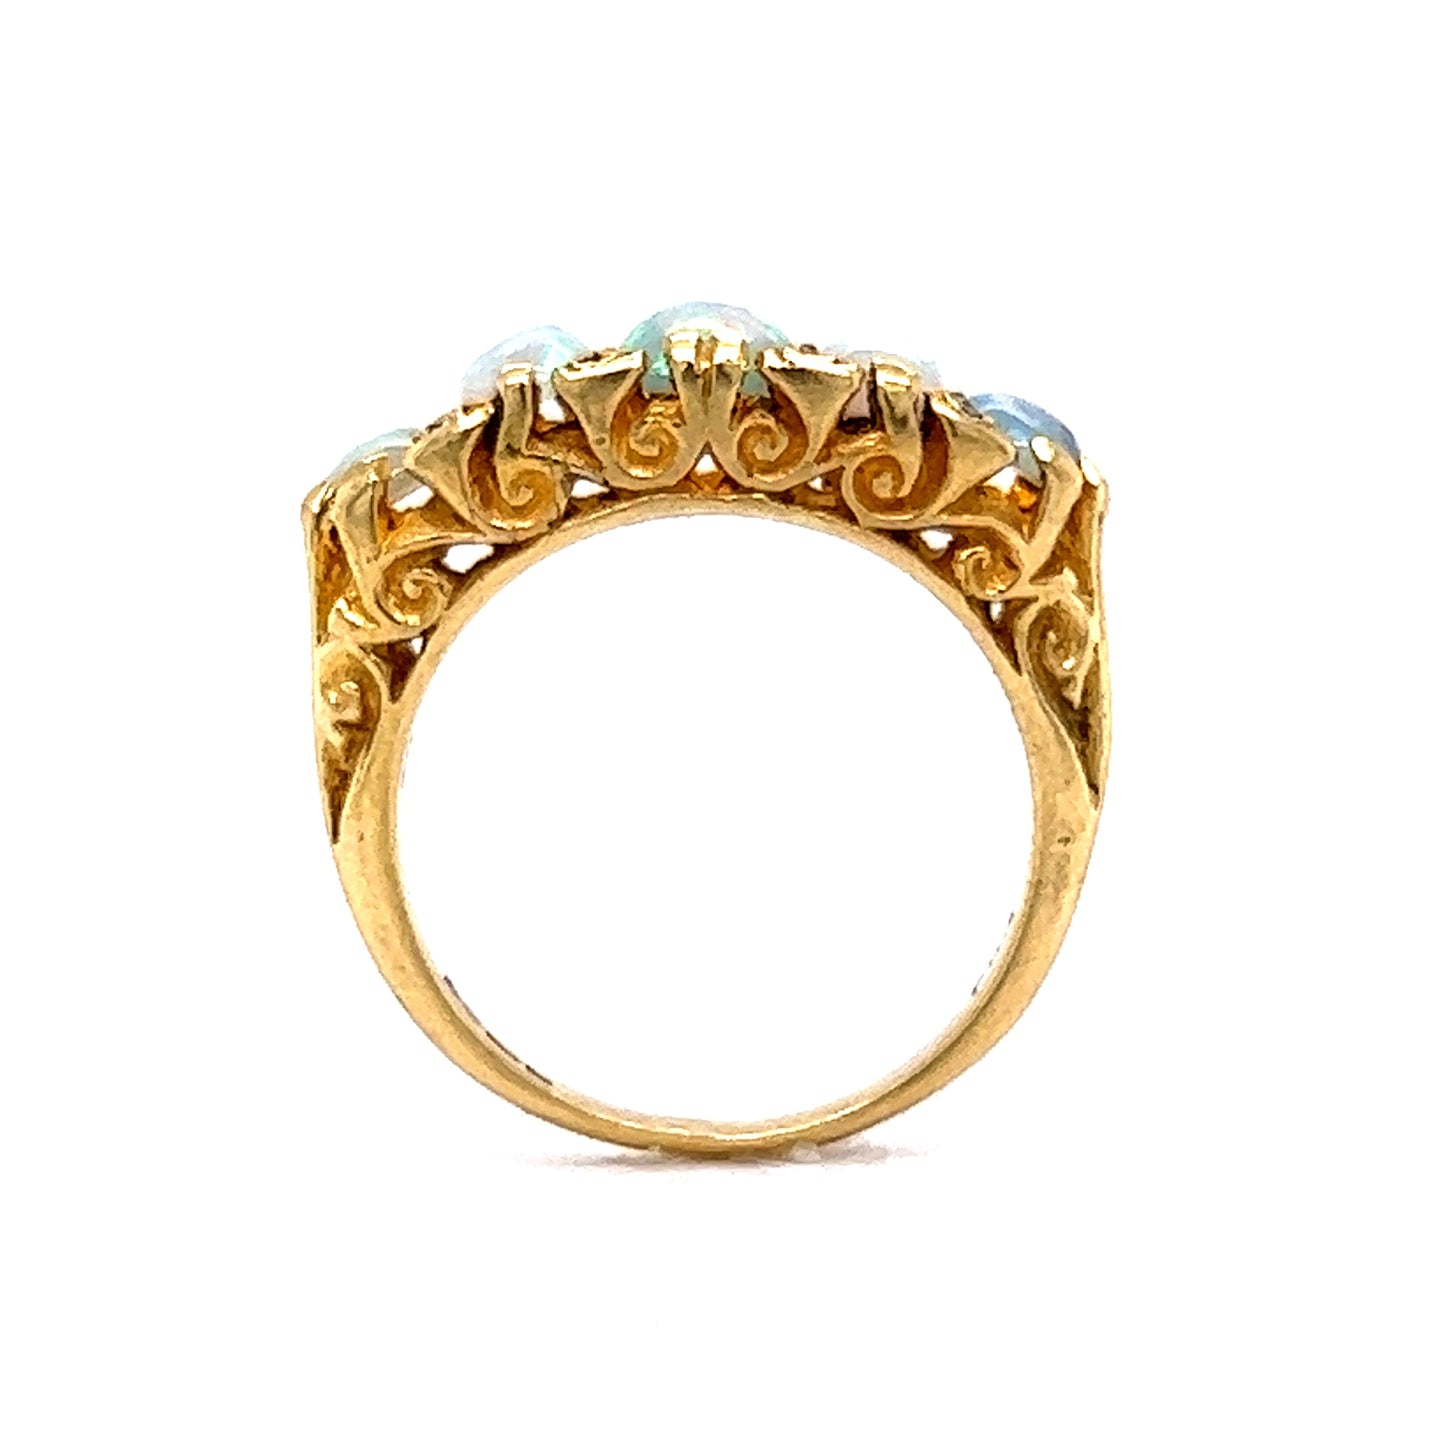 Antique Victorian Cabochon Opal Ring in 14k Yellow Gold